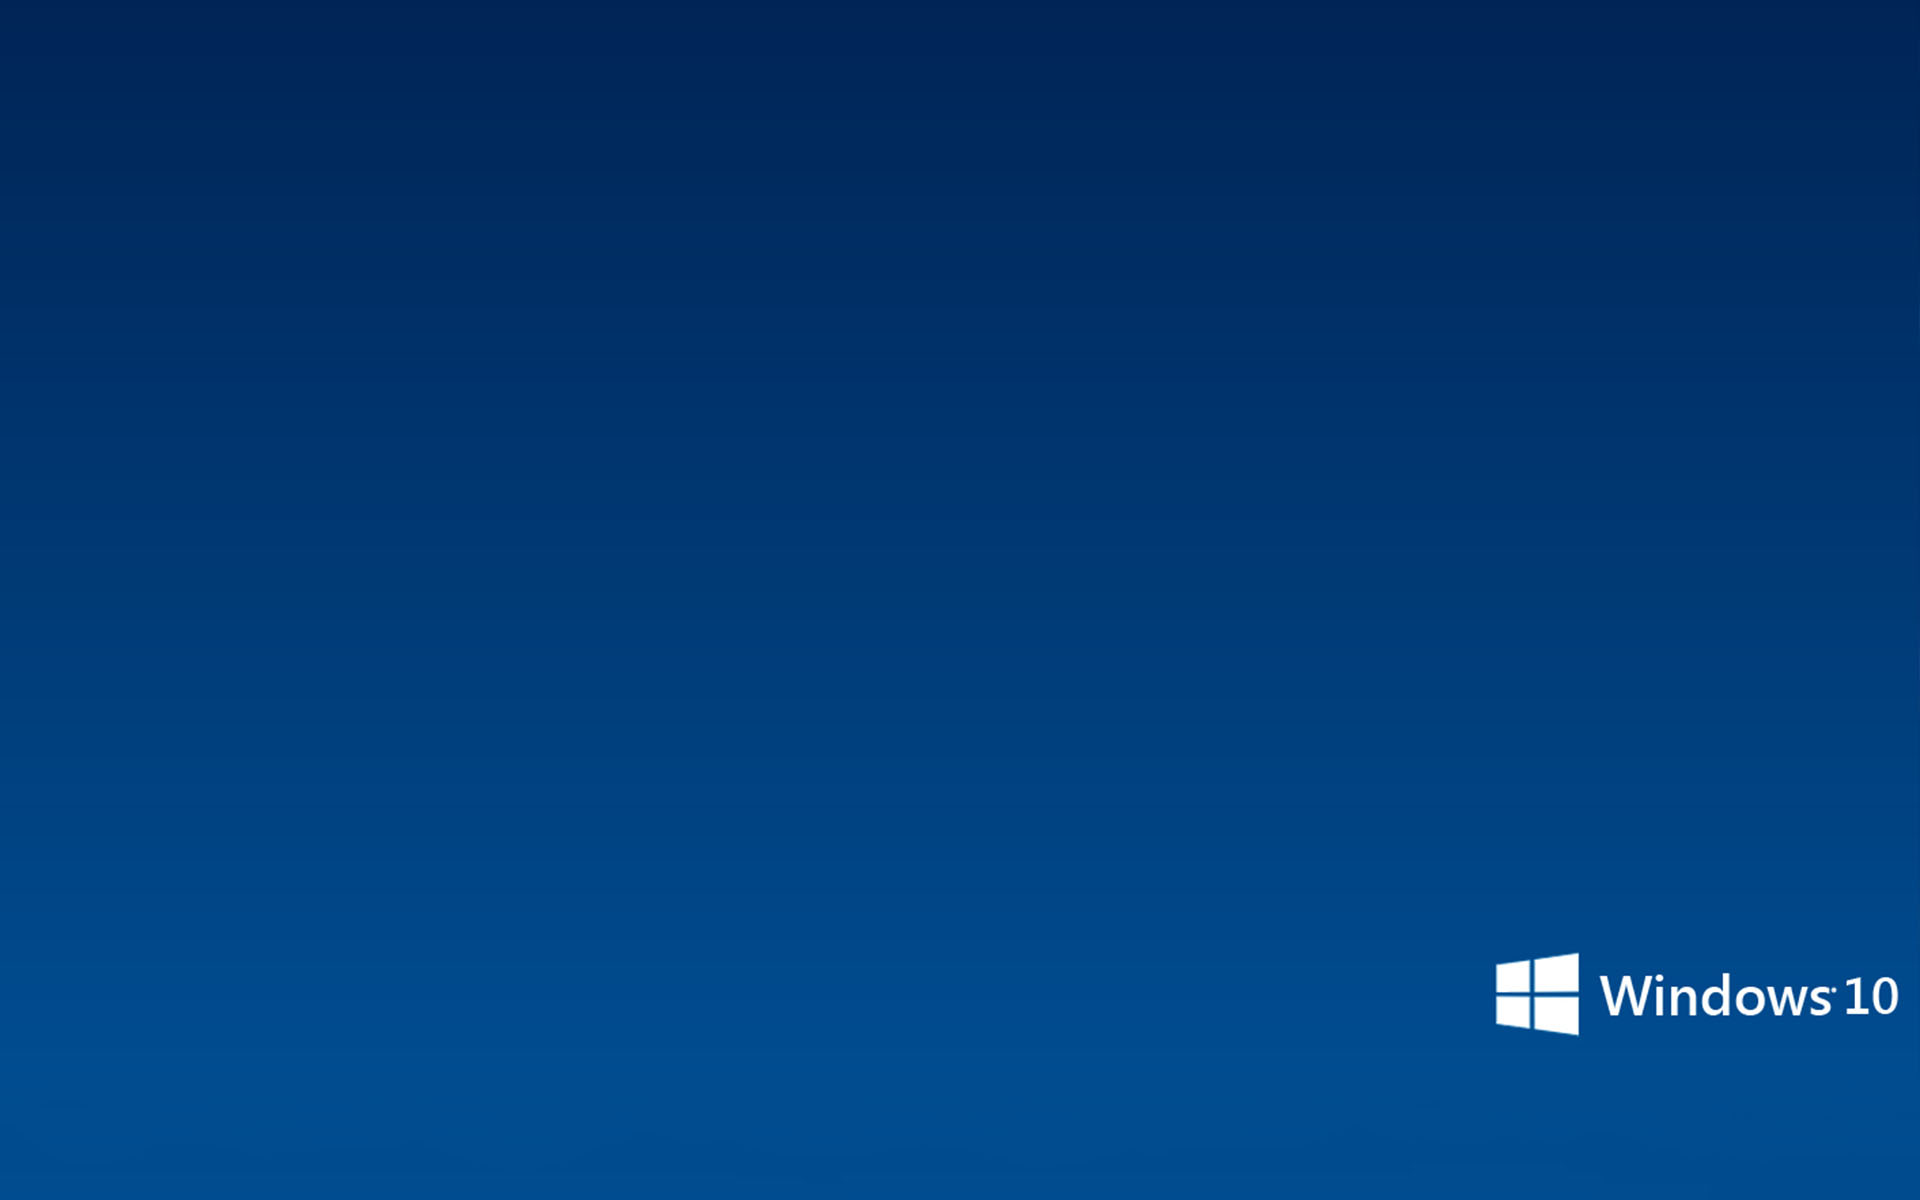 Free Download Simple Microsoft Windows 10 Wallpaper Wallpapers 19x10 For Your Desktop Mobile Tablet Explore 50 Random Wallpaper Windows 10 Free Windows 10 Wallpaper Themes Windows 10 Randomize Wallpaper Slideshow